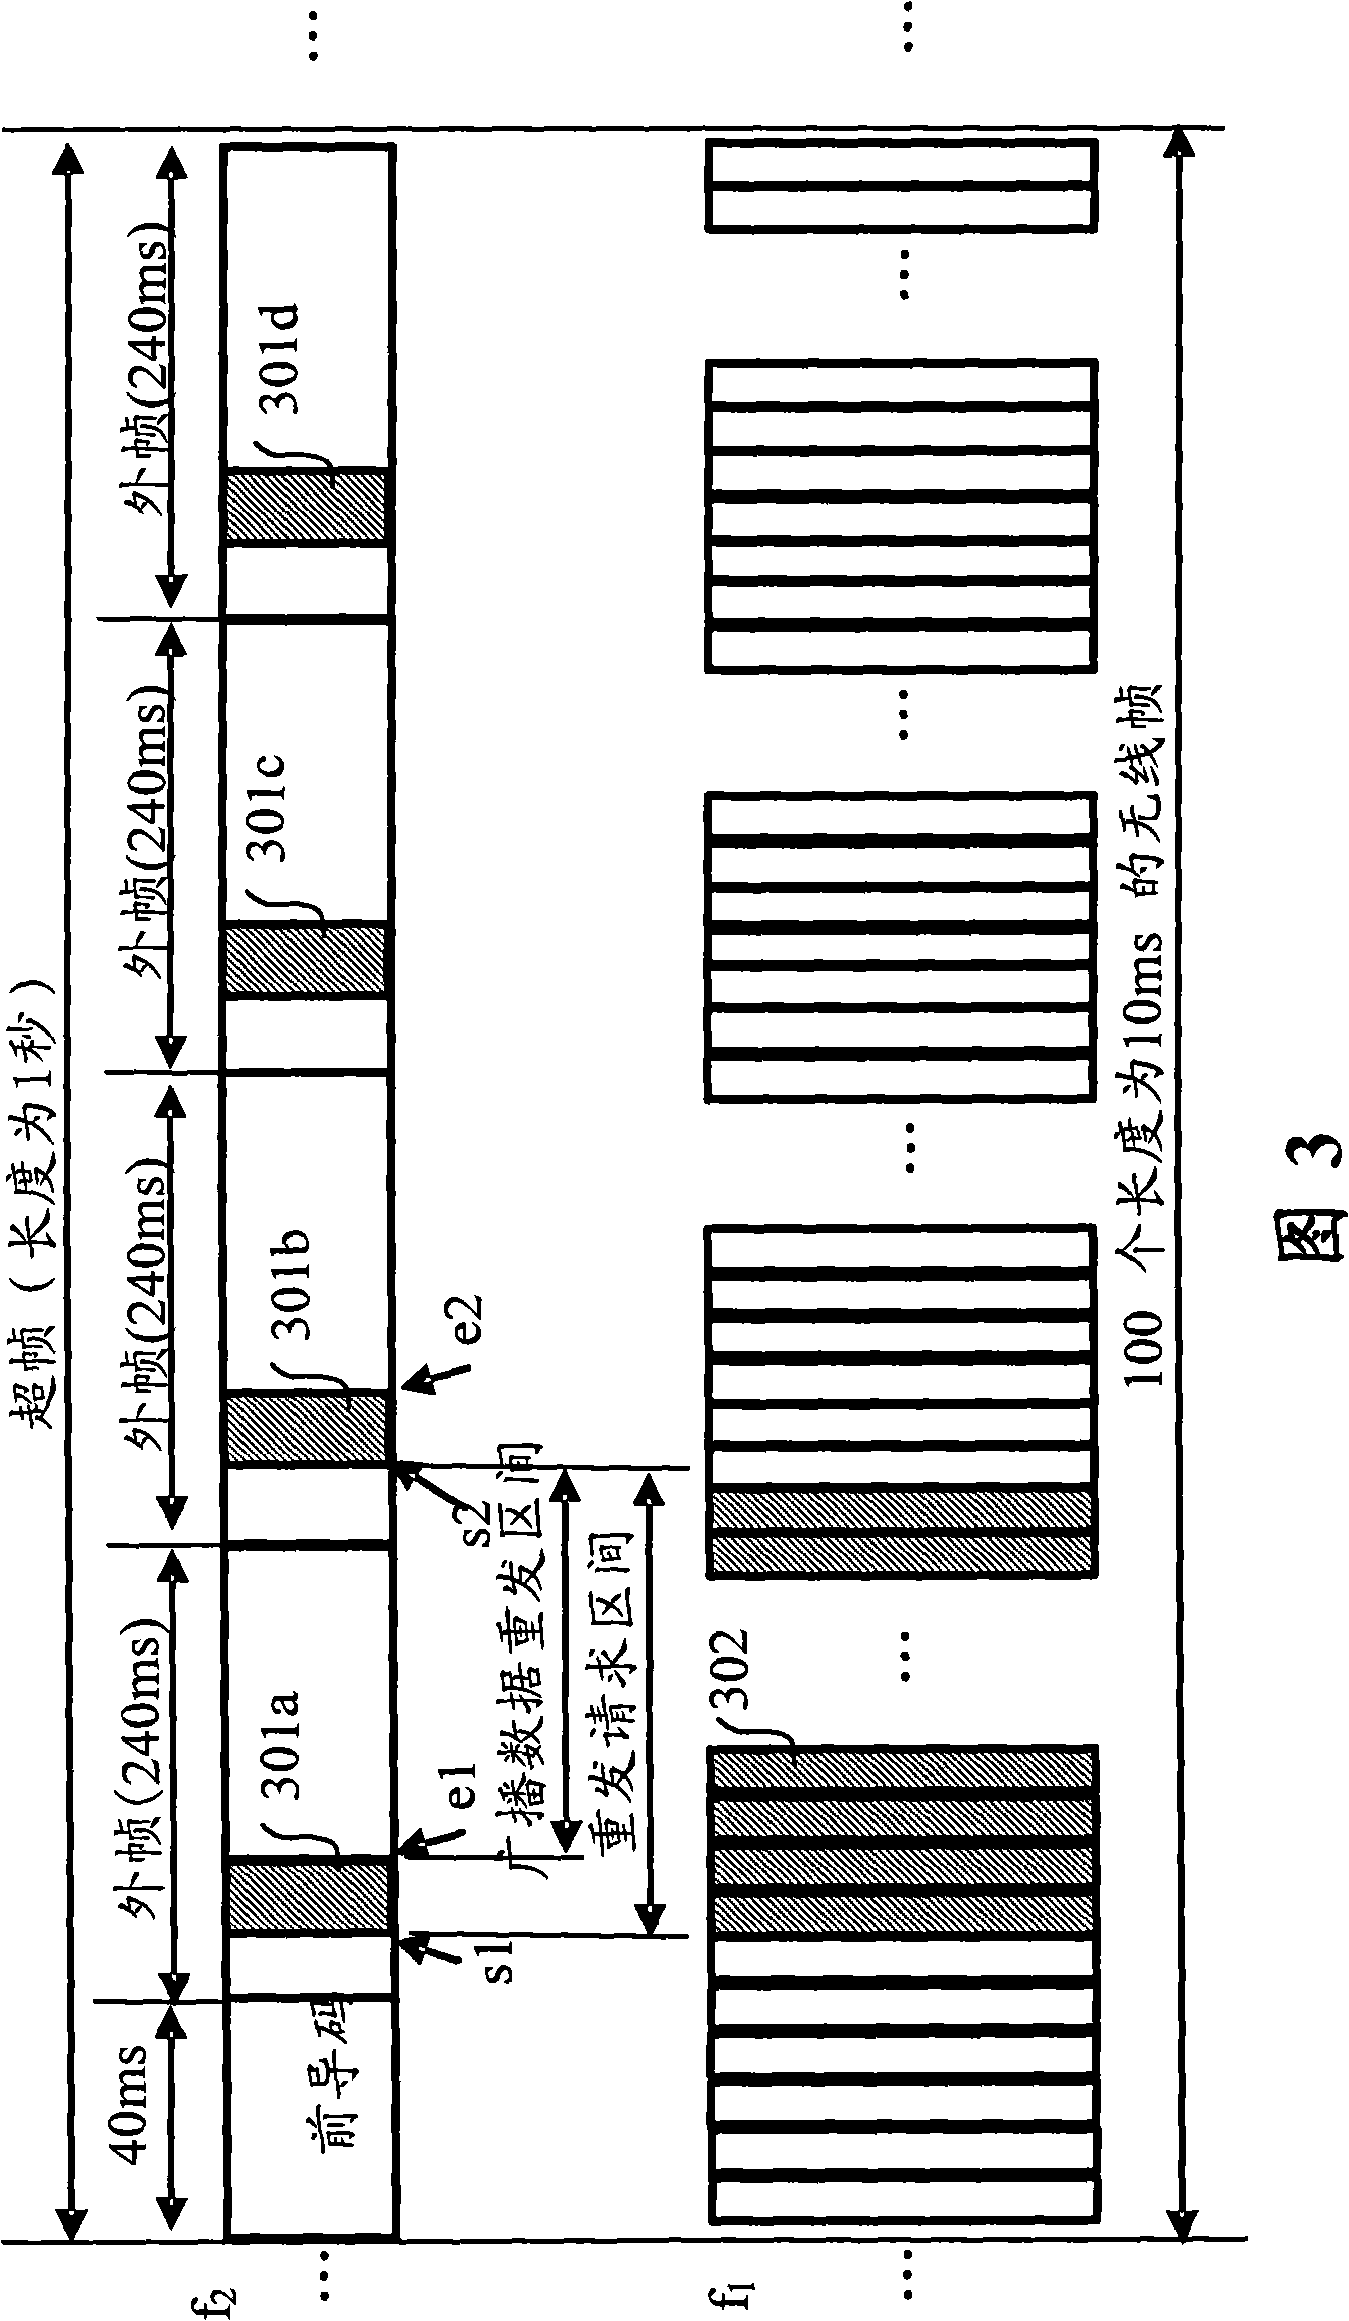 Retransmitting method of broadcasted data in network of single frequency